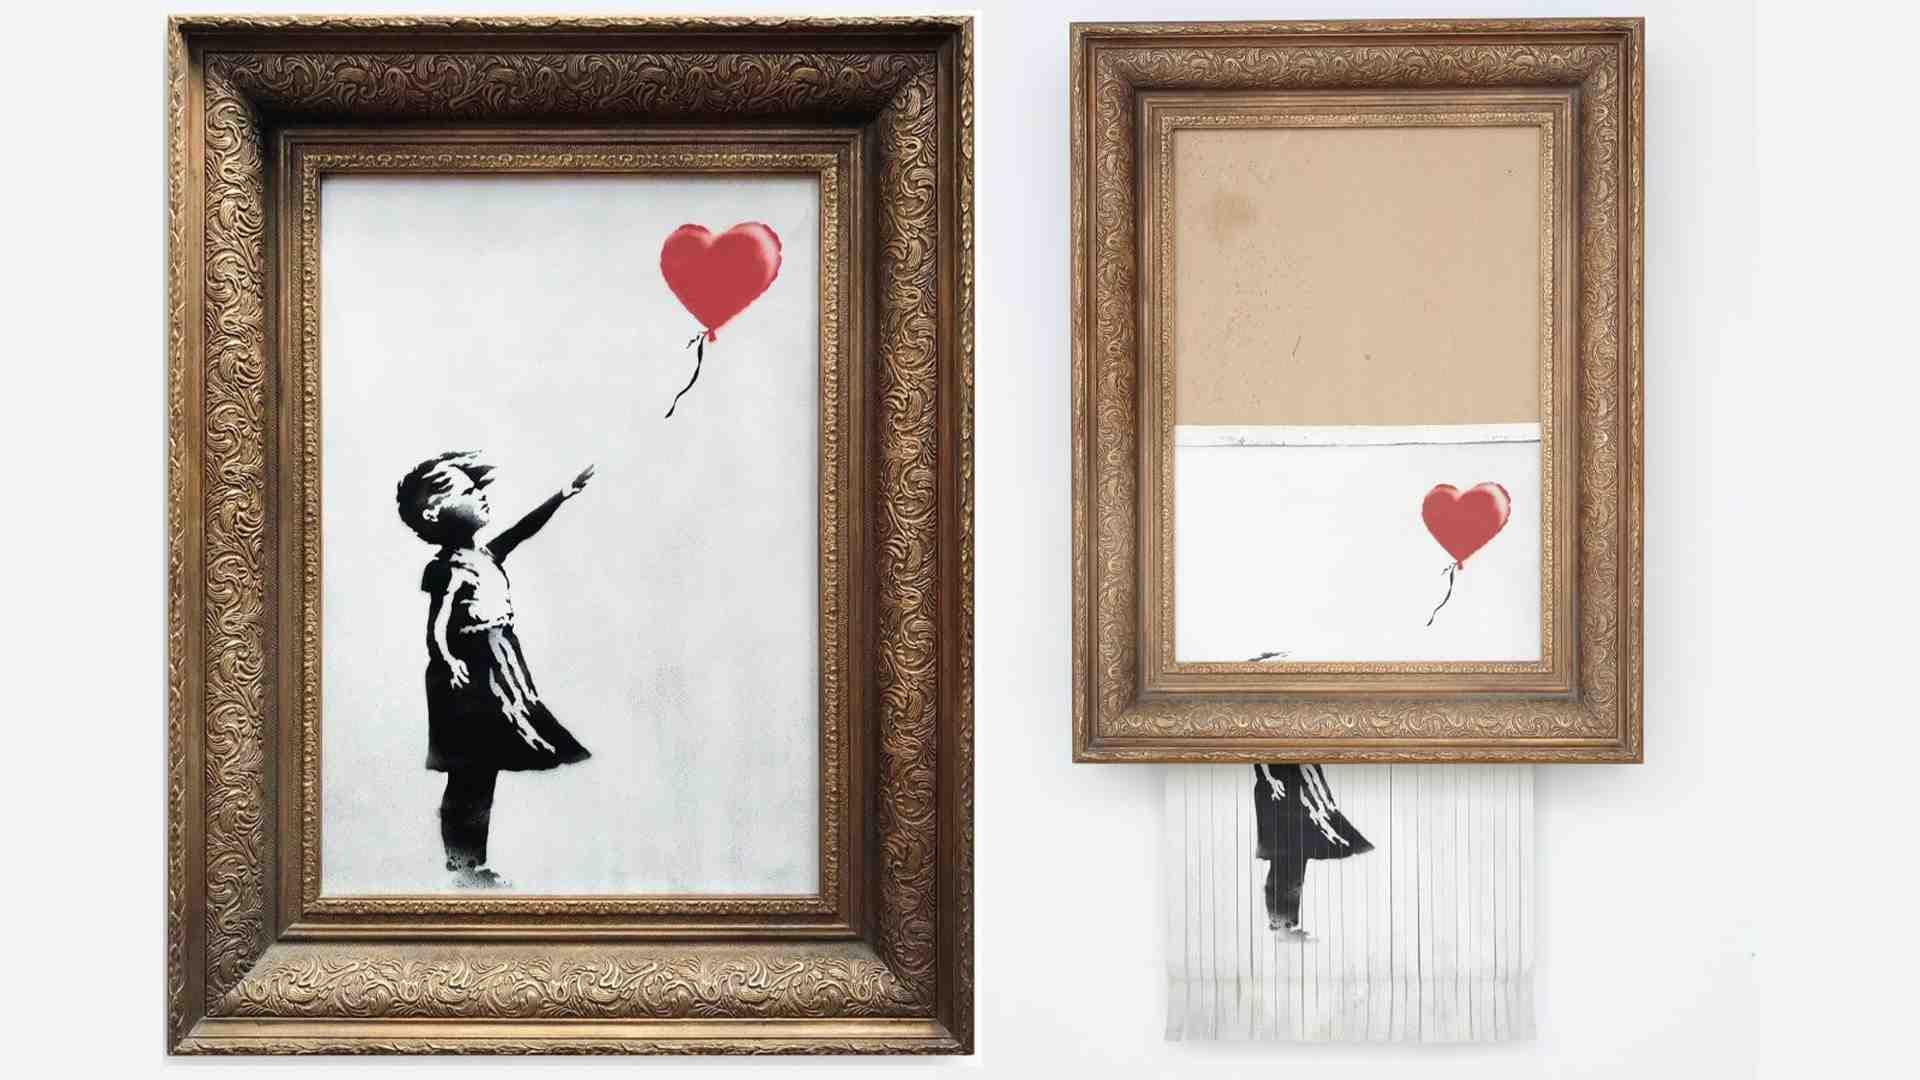 Banksy’s Shredded Artwork Sold for a Record £18.5m comes to Asia